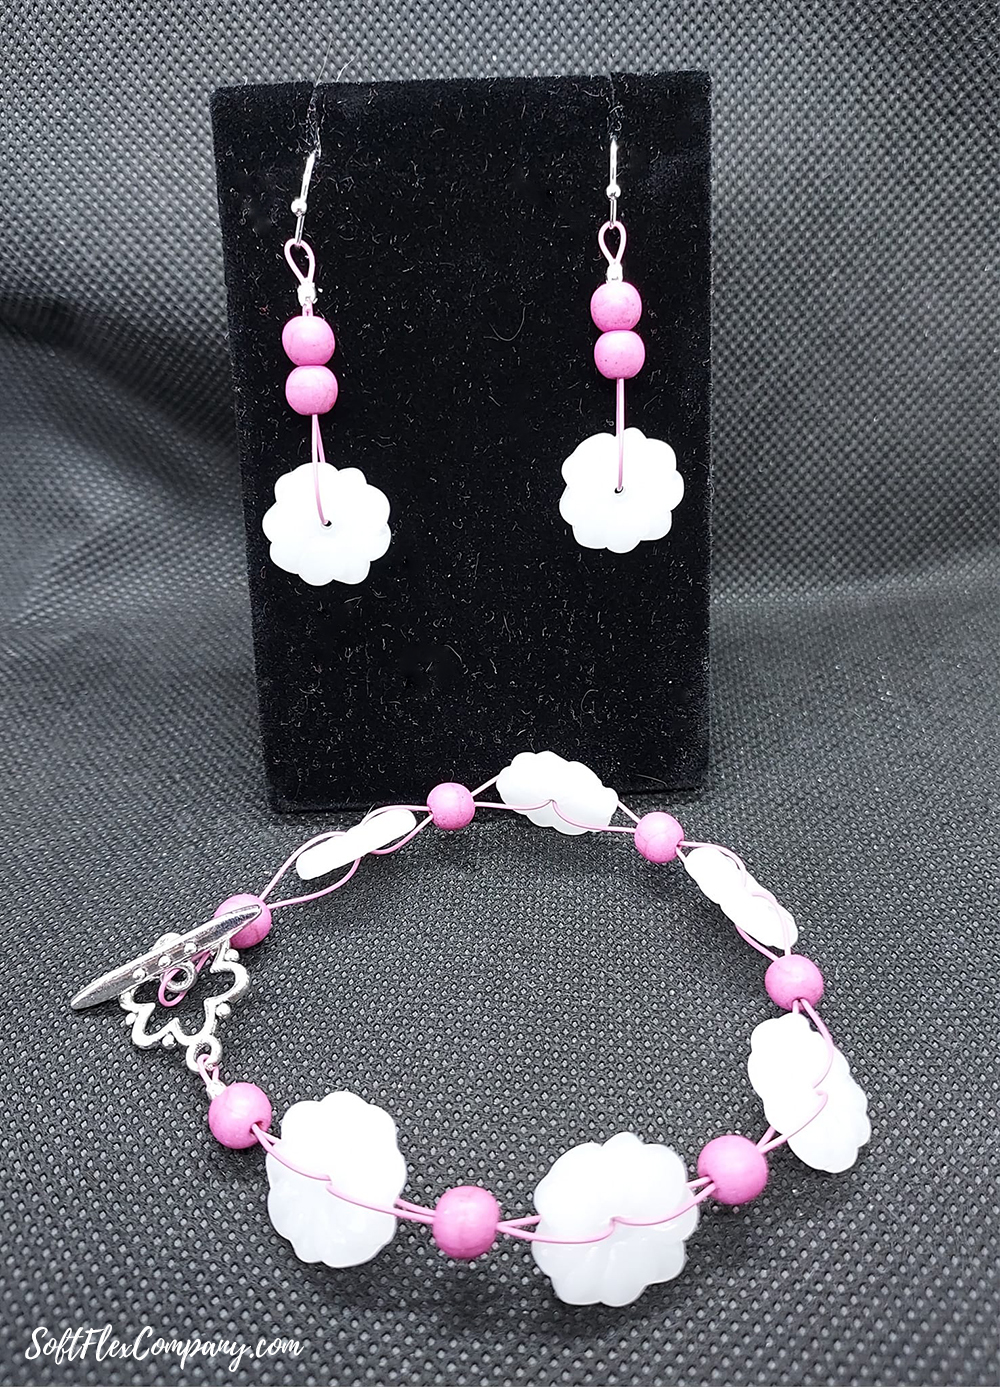 Cherry Blossoms Jewelry by Carey Marshall Leimbach